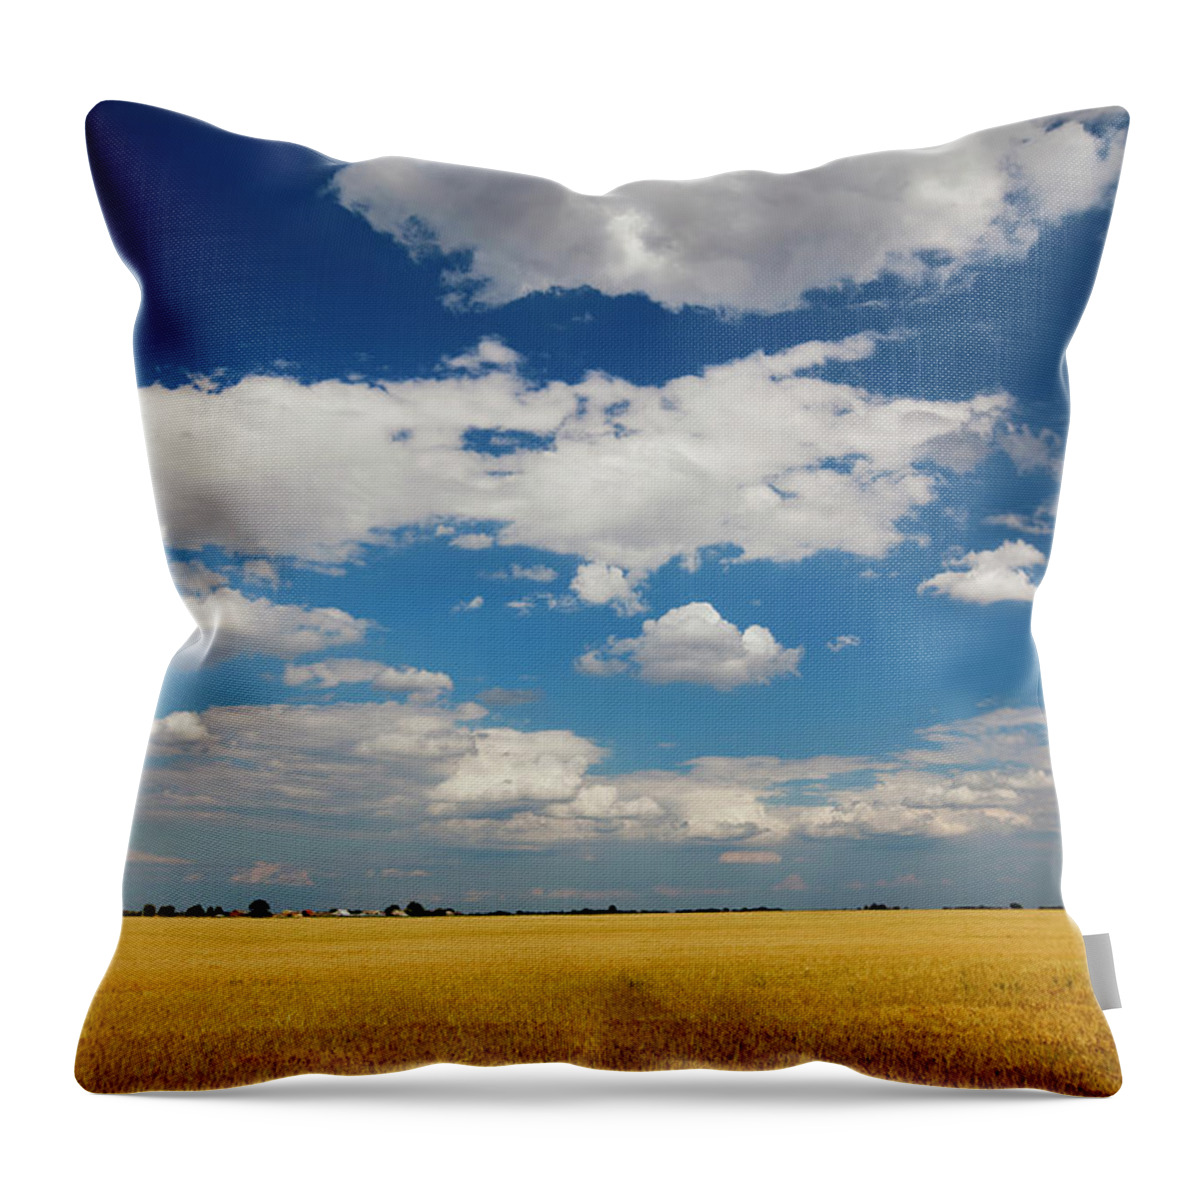 Scenics Throw Pillow featuring the photograph Field by Gosiek-b